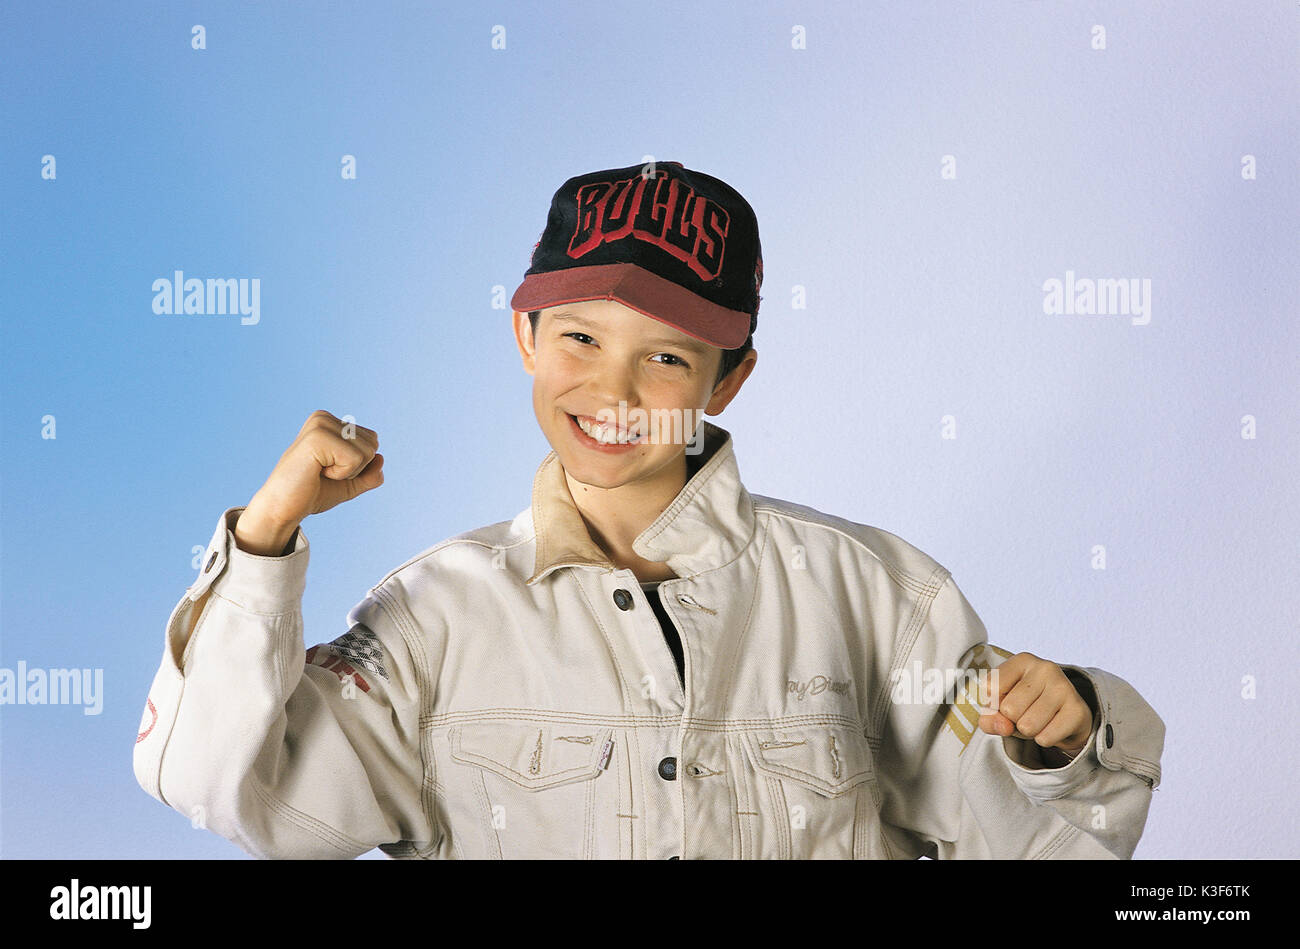 Boy rejoices, is pleased, laughs, travels an arm upwards Stock Photo